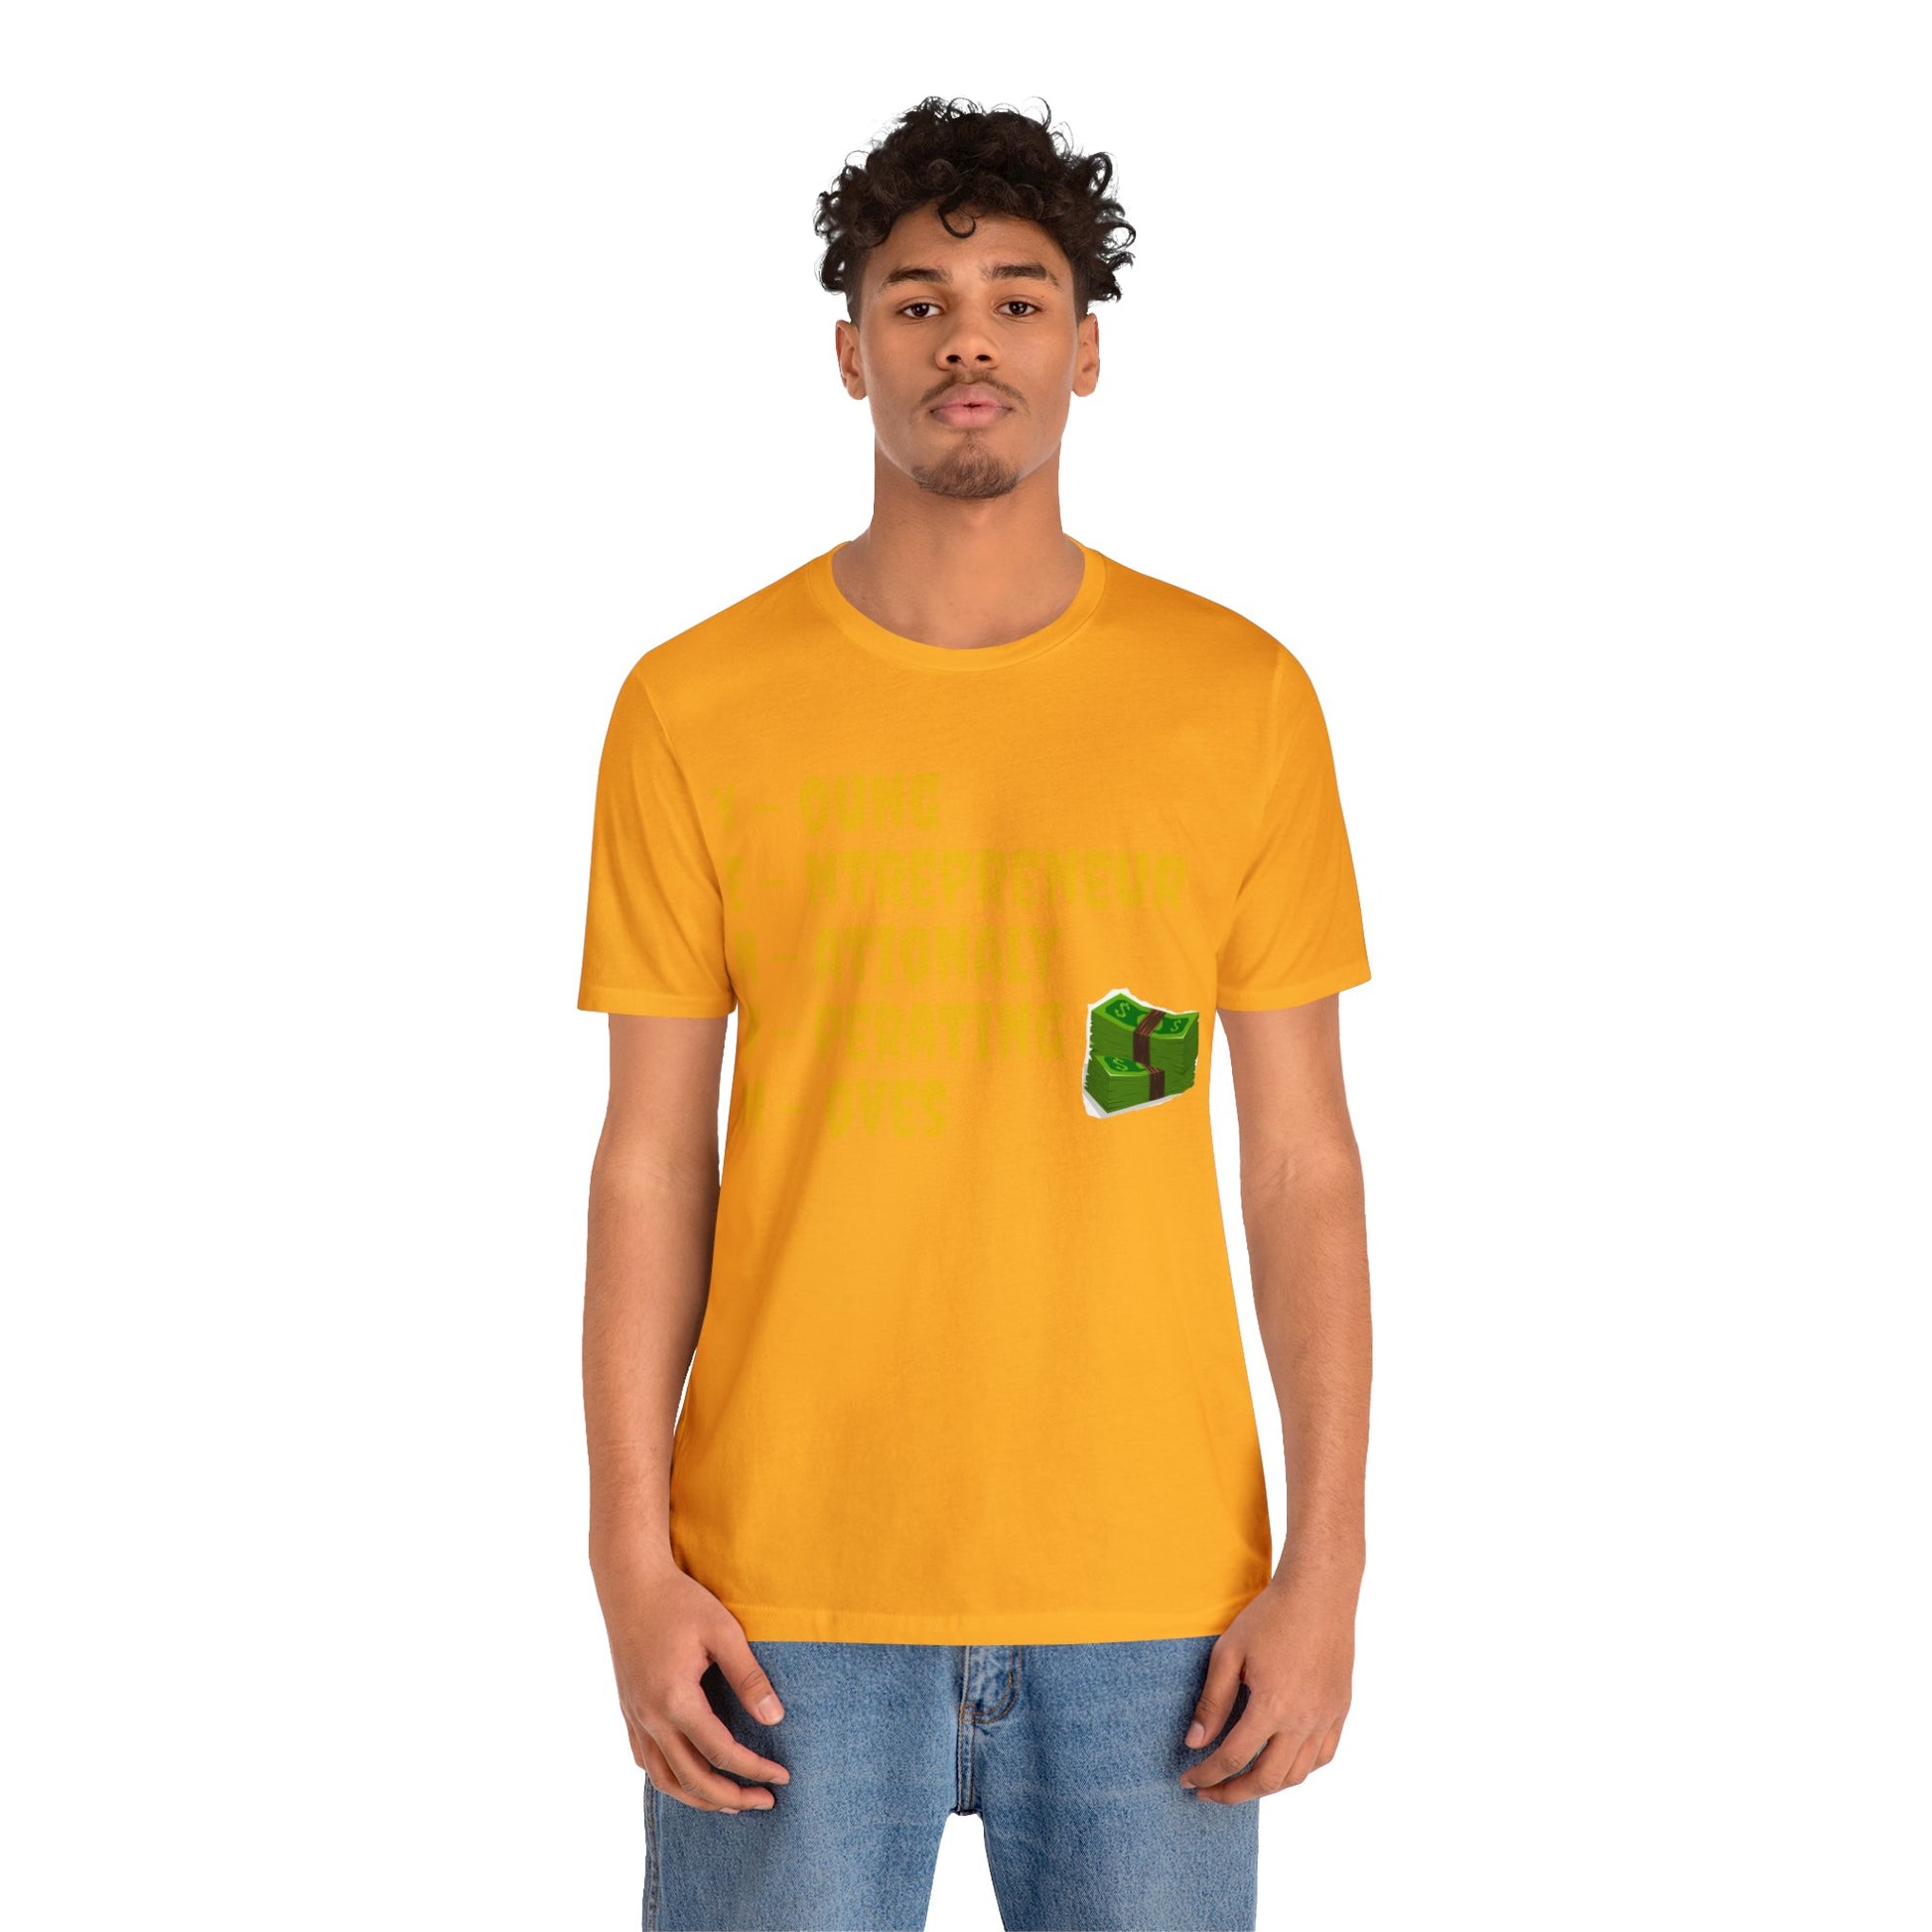 WILKYsT-ShirtUnisex Jersey Short Sleeve TeeThis classic unisex jersey short sleeve tee fits like a well-loved favorite. Soft cotton and quality print make users fall in love with it over and over again. These